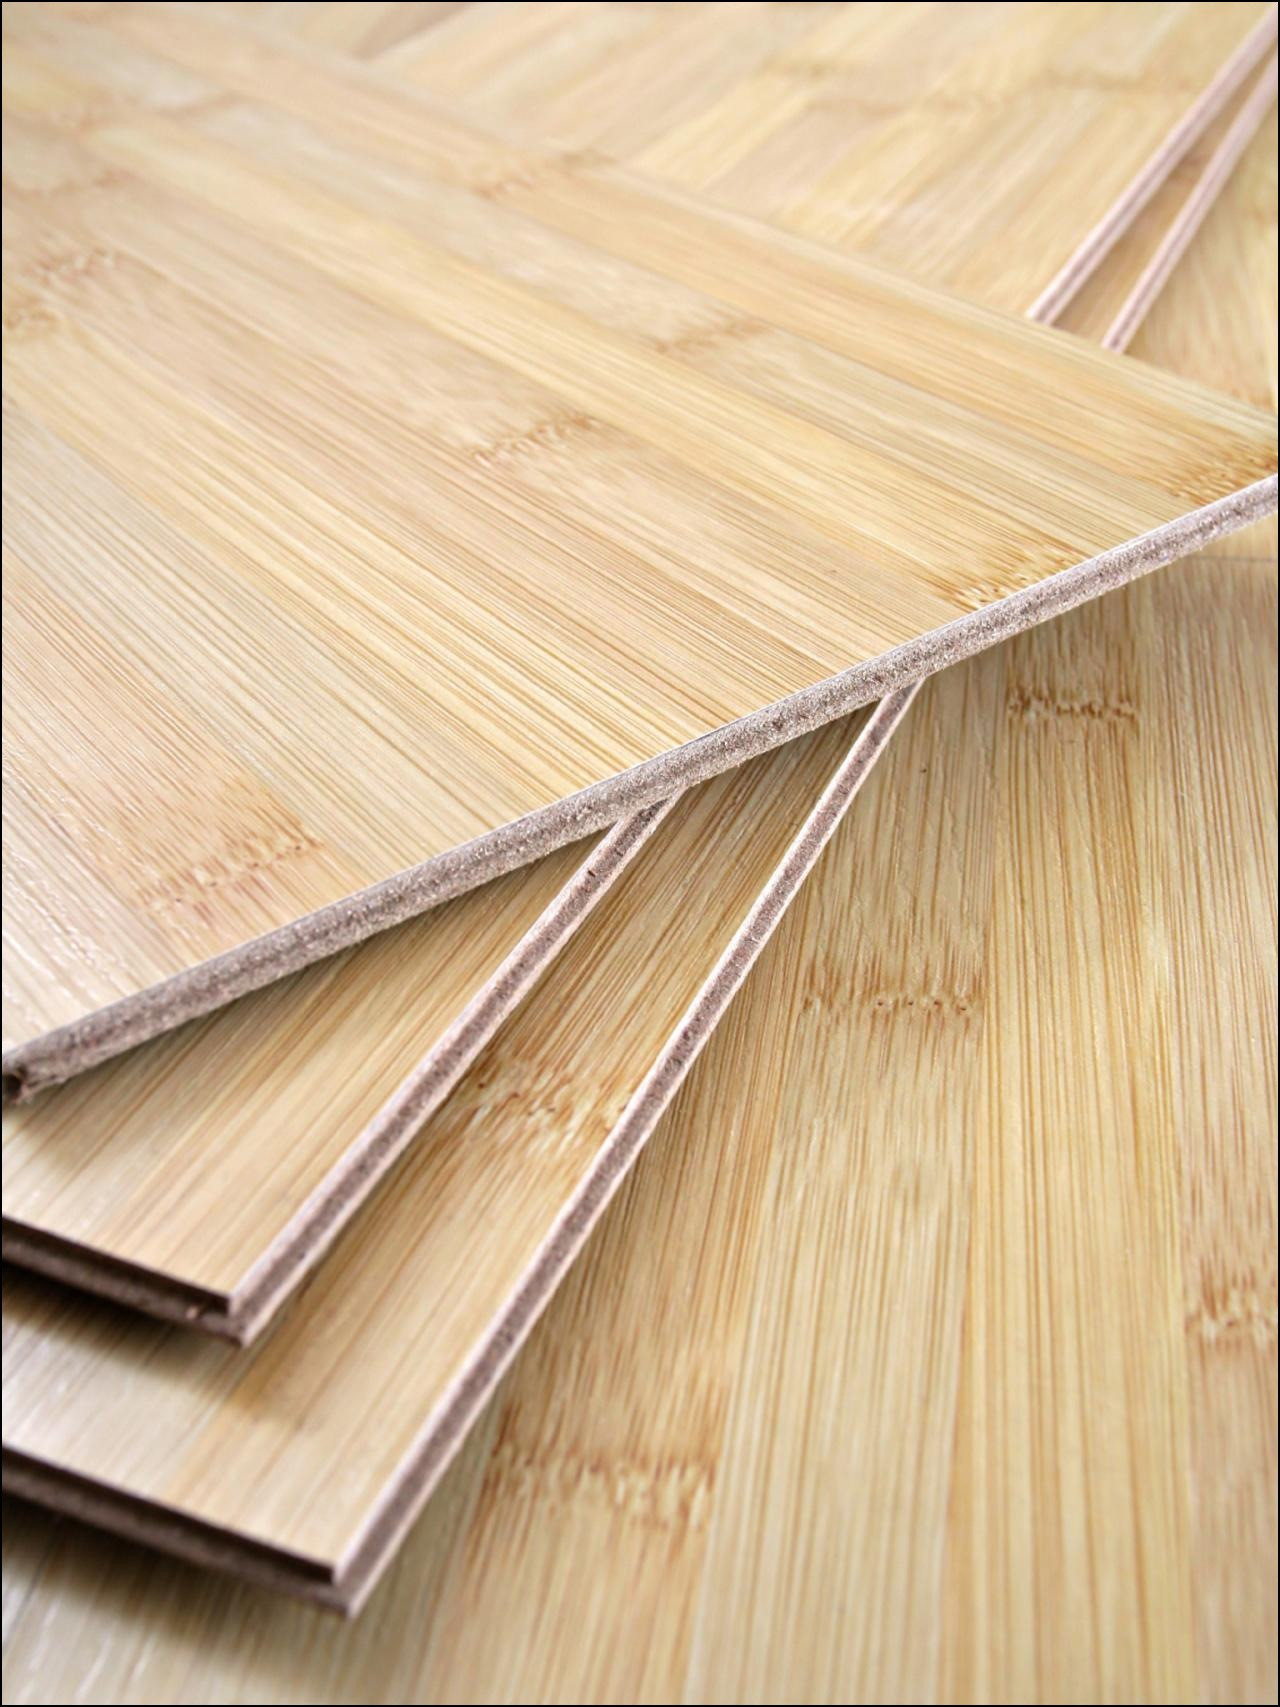 26 Awesome Hardwood Flooring Prices Per Square Foot Home Depot 2024 free download hardwood flooring prices per square foot home depot of home depot queen creek flooring ideas within home depot solid bamboo flooring images hardwood floor design wood flooring cost strand ba